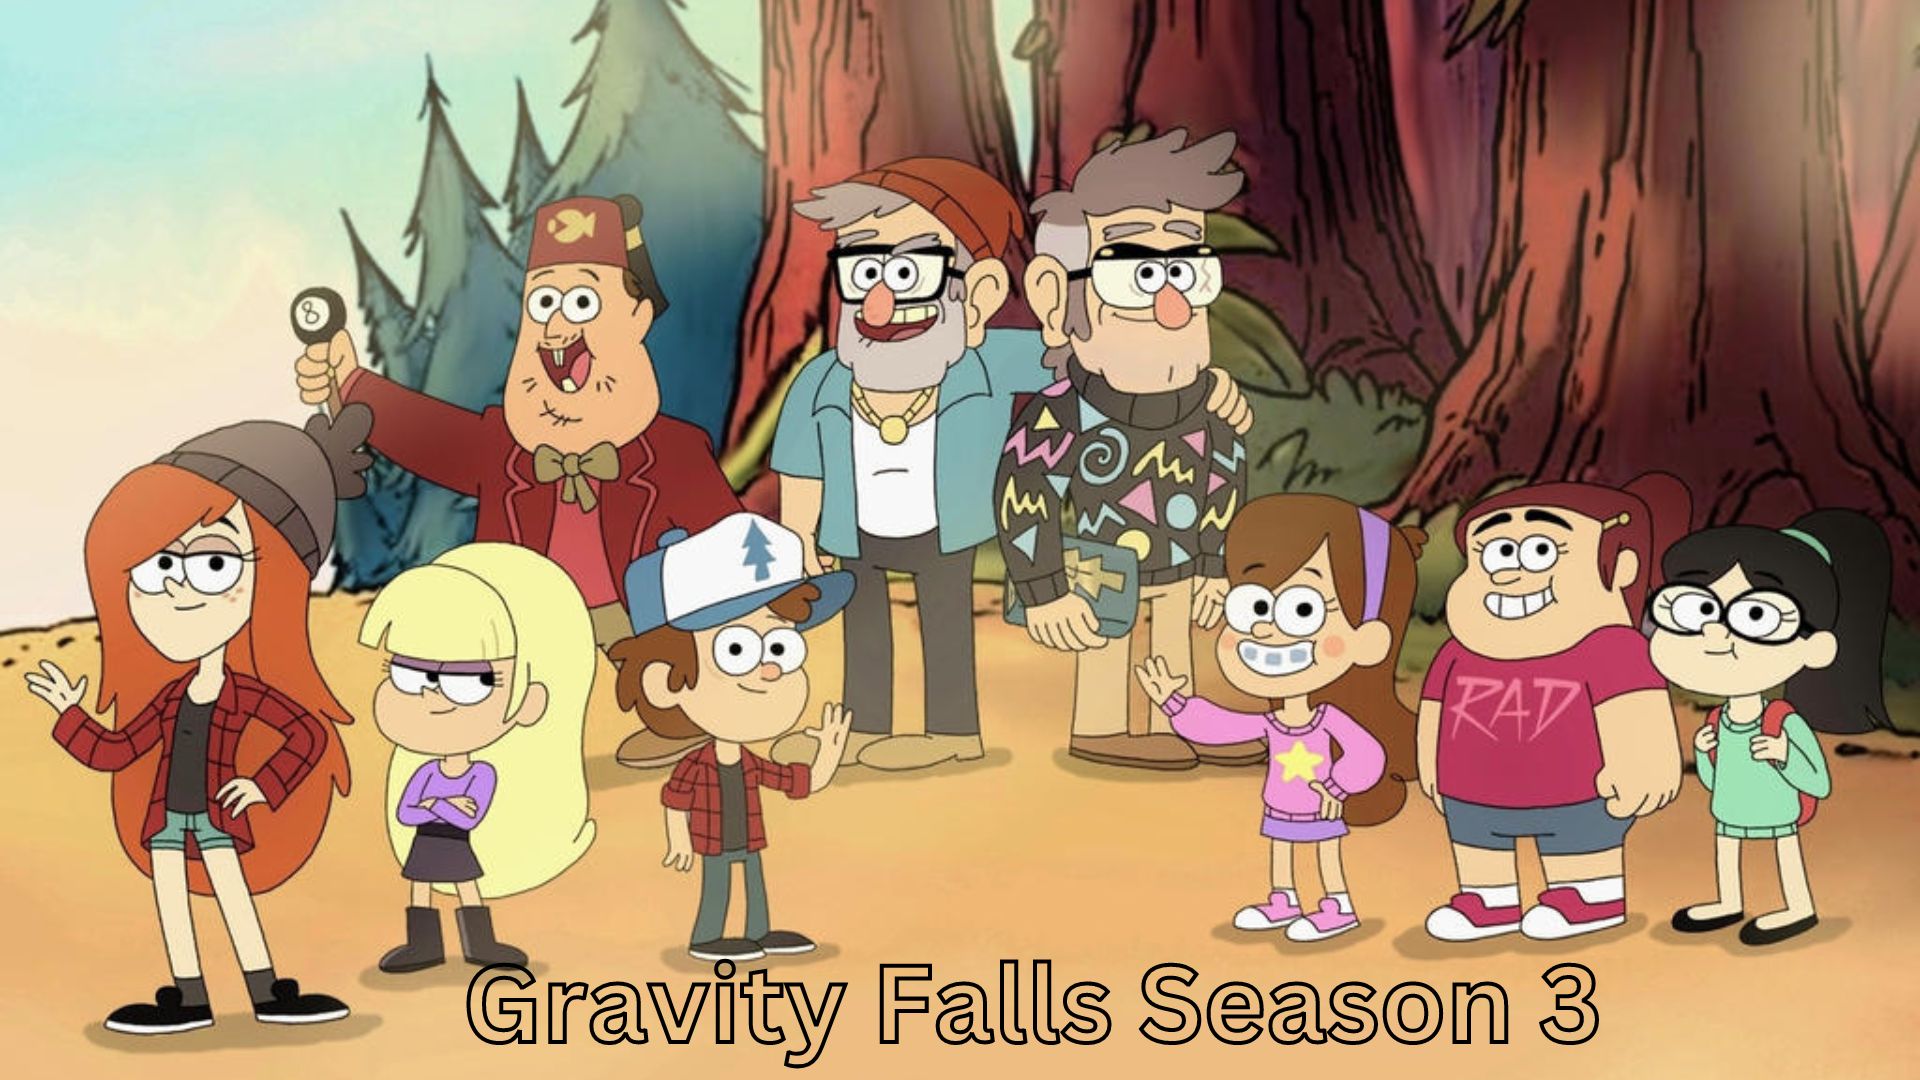 Is Official Confirmation Pending For Gravity Falls Season 3?